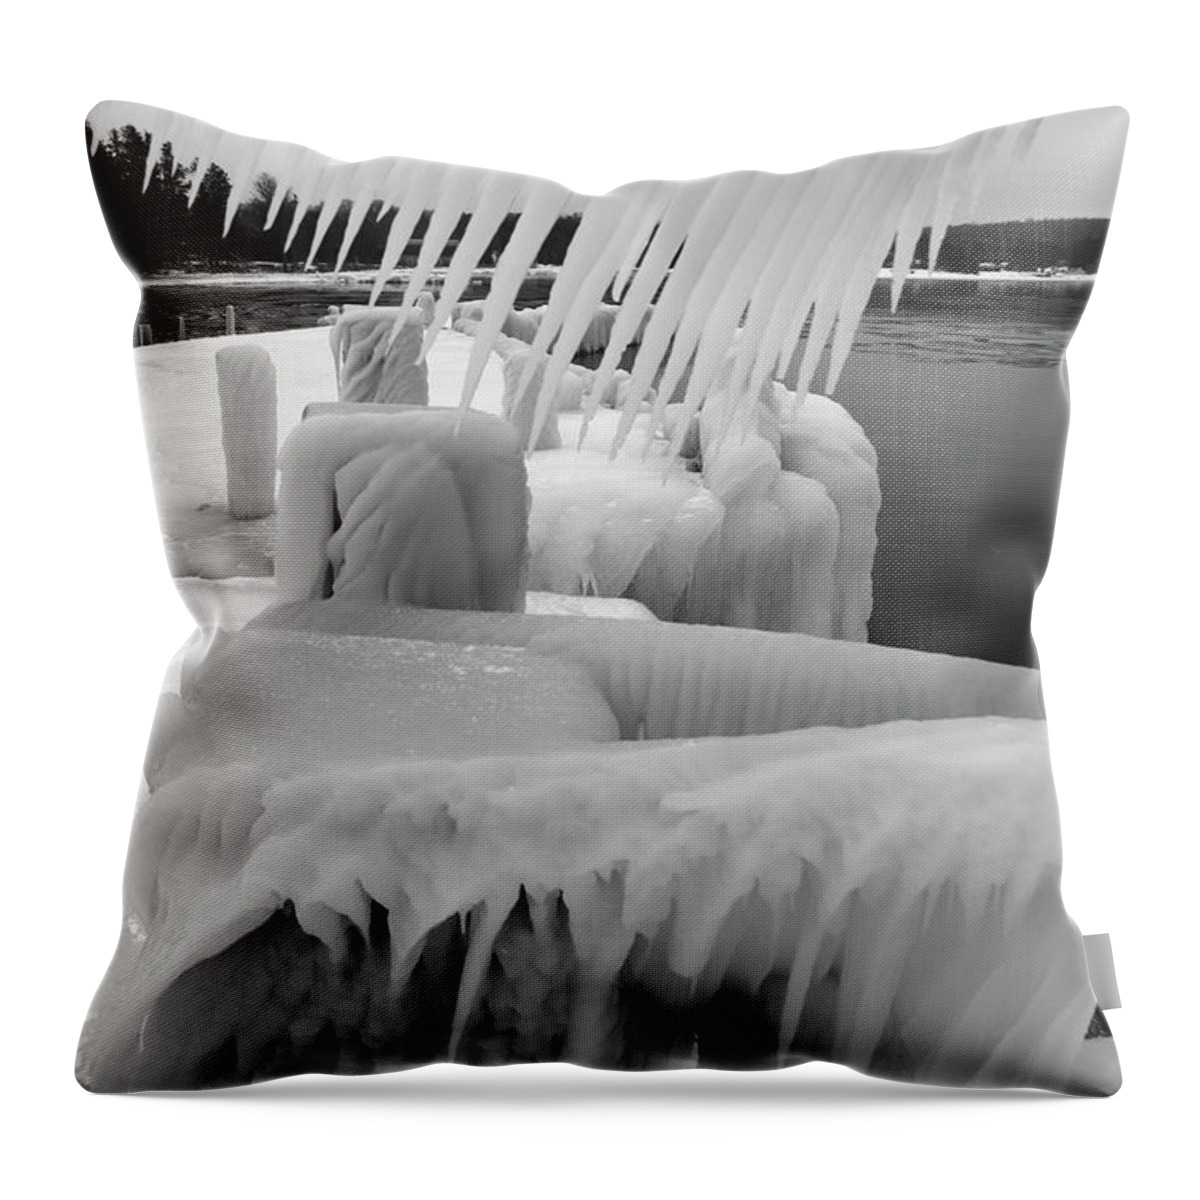 Dock Throw Pillow featuring the photograph Ice Ice and More Ice B W by David T Wilkinson